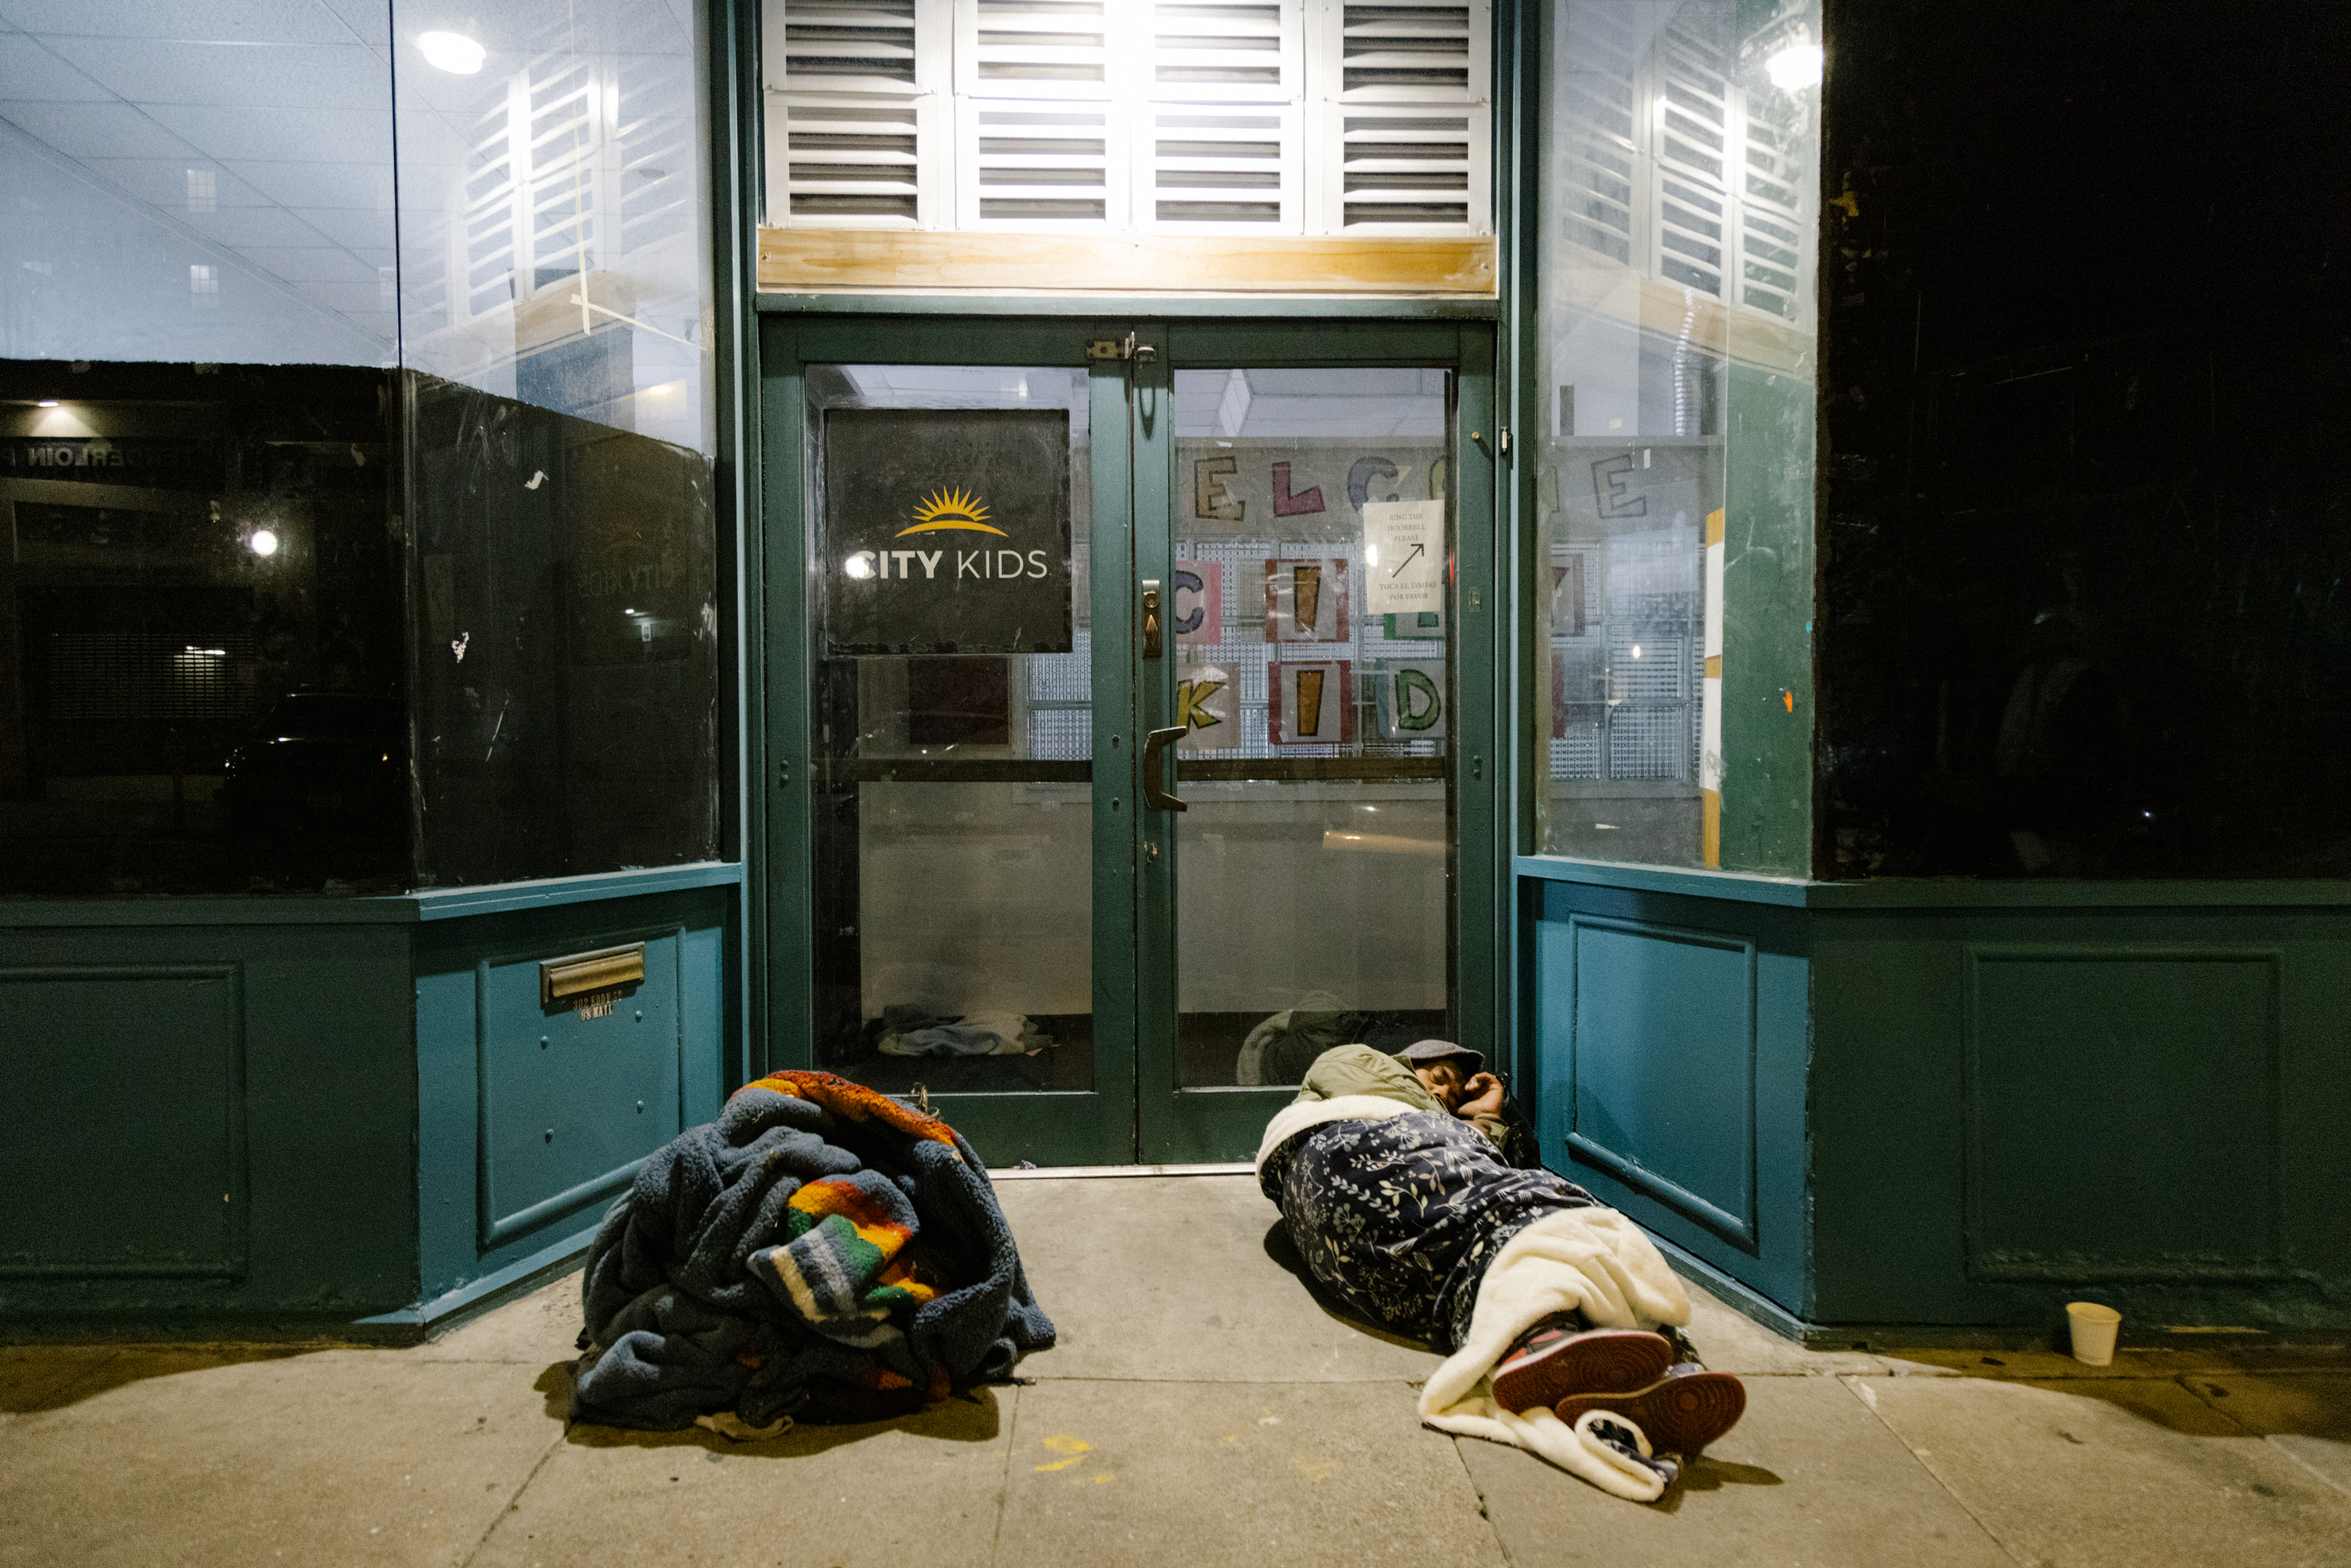 Two people wrapped in blankets lay on the sidewalk at night in front of a storefront